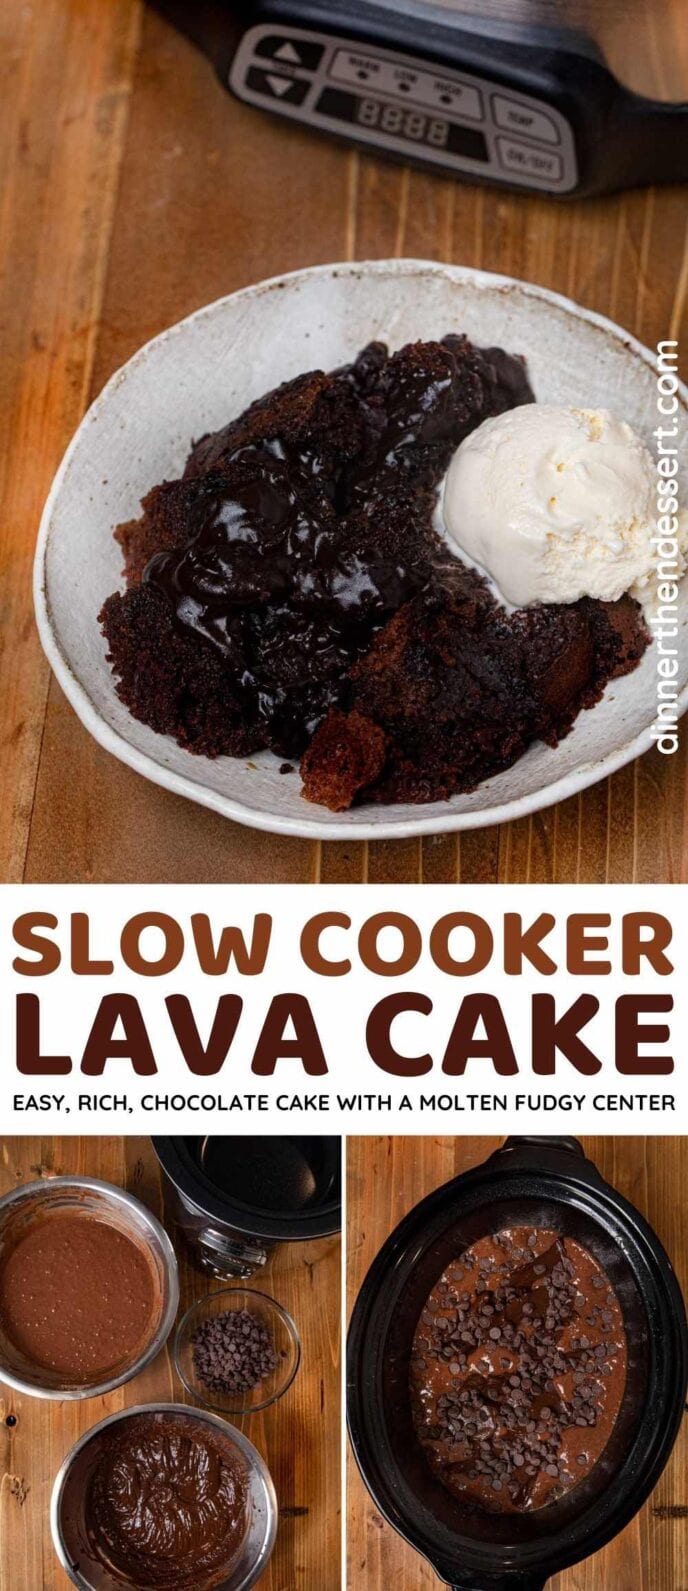 Slow Cooker Lava Cake collage